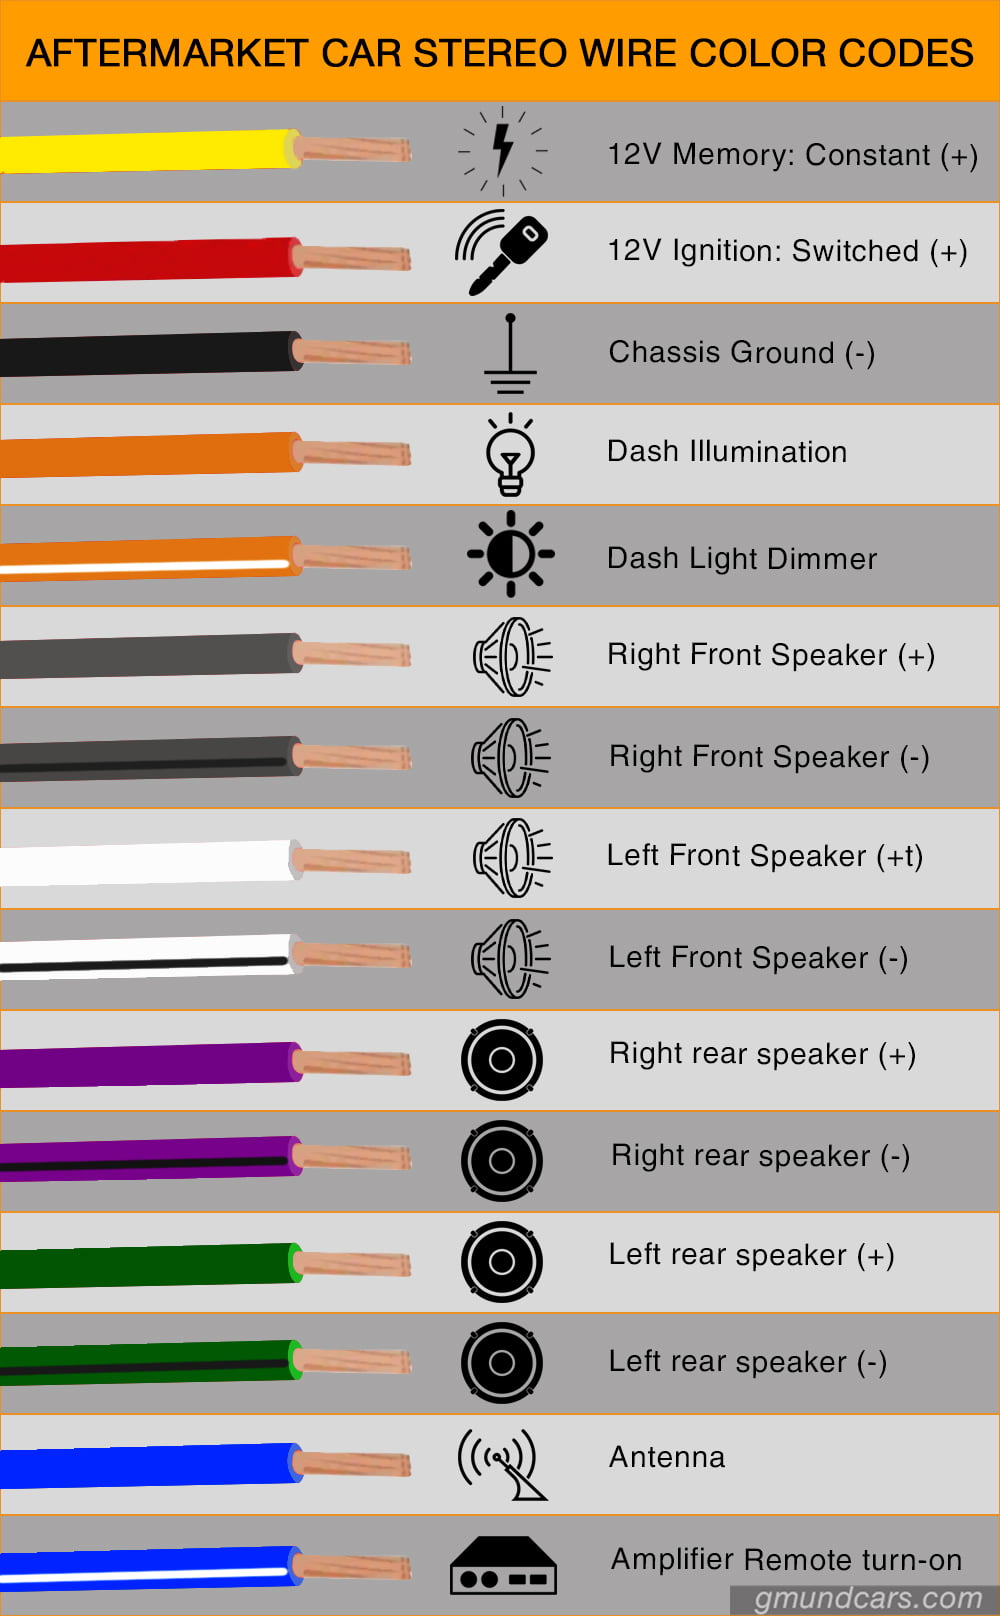 Car audio wire type, color & diagram: The ultimate guide - Gmund Cars